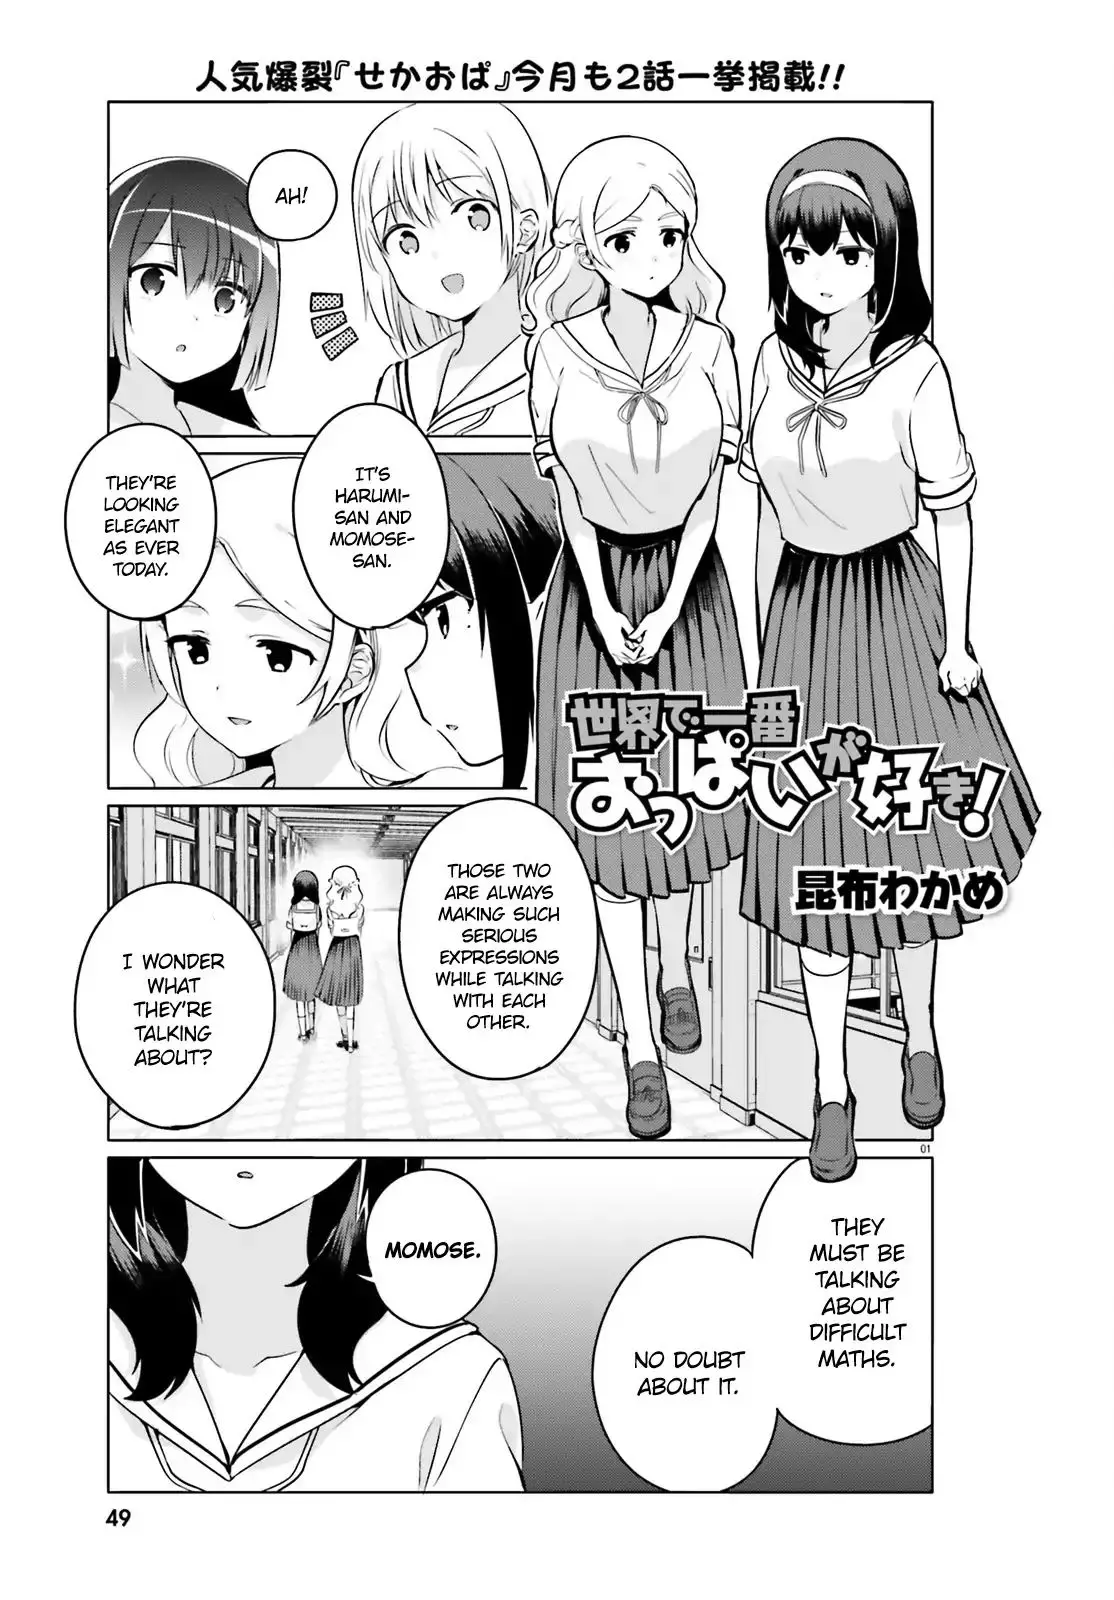 I Like Oppai Best In The World! - 23 page 1